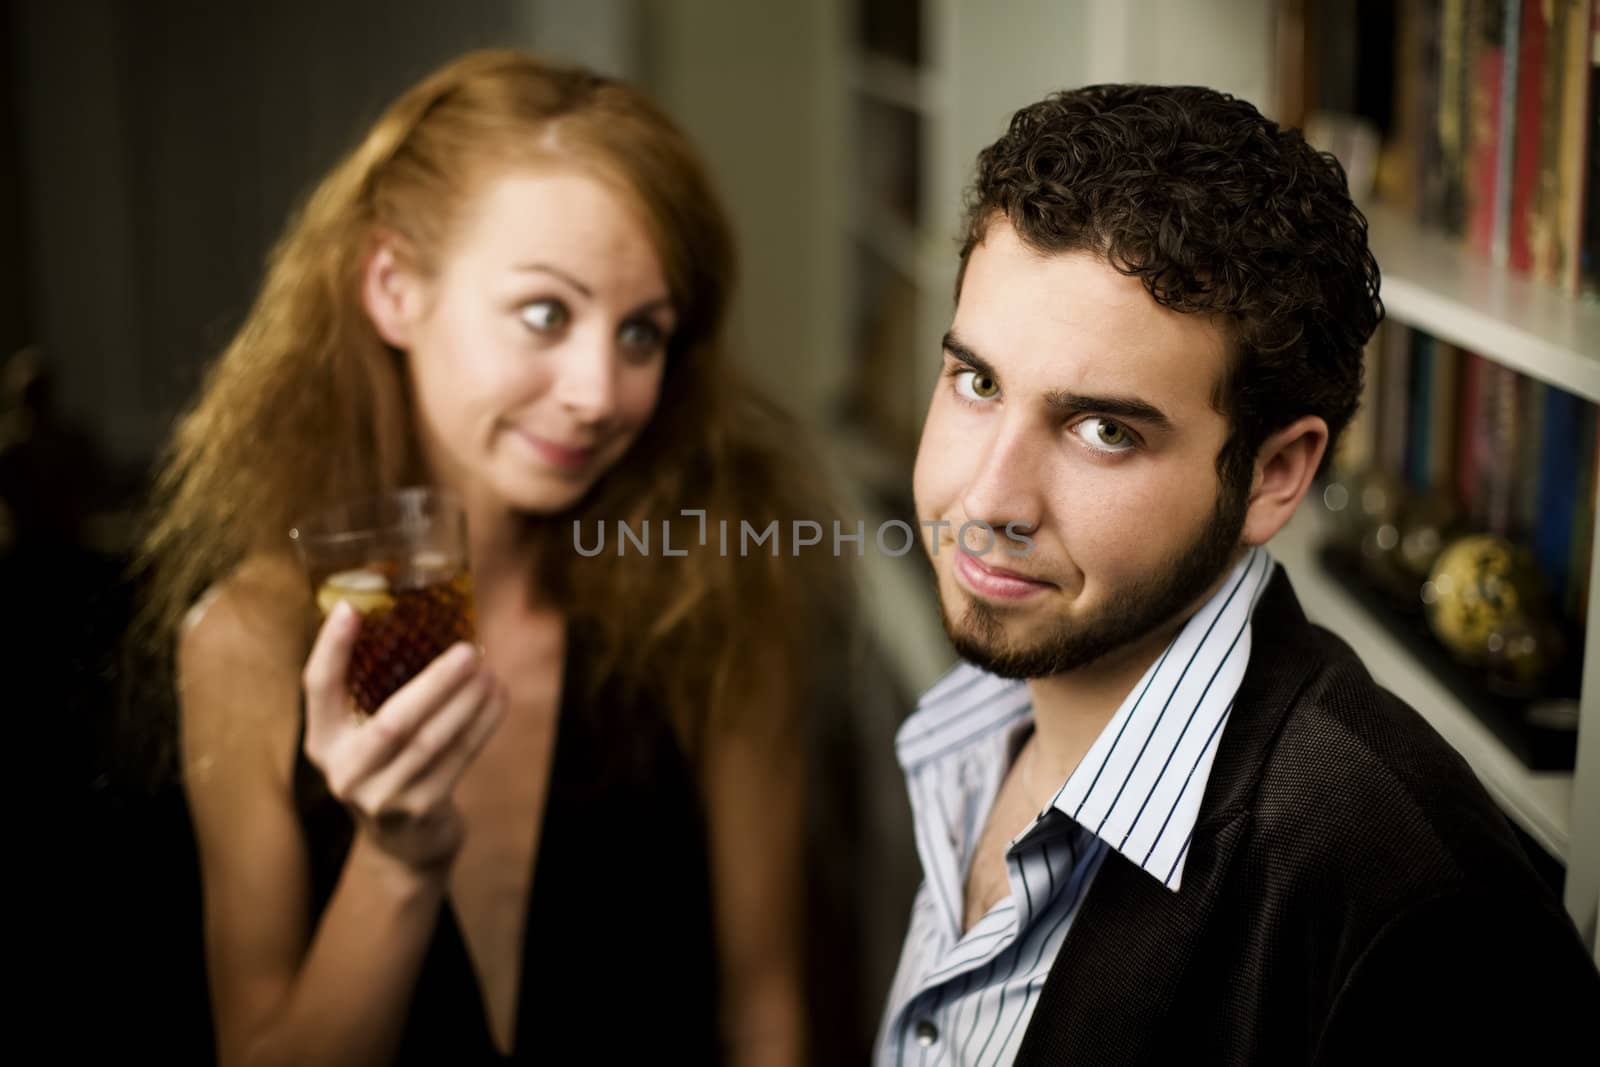 Woman looks lovingly at young man by Creatista